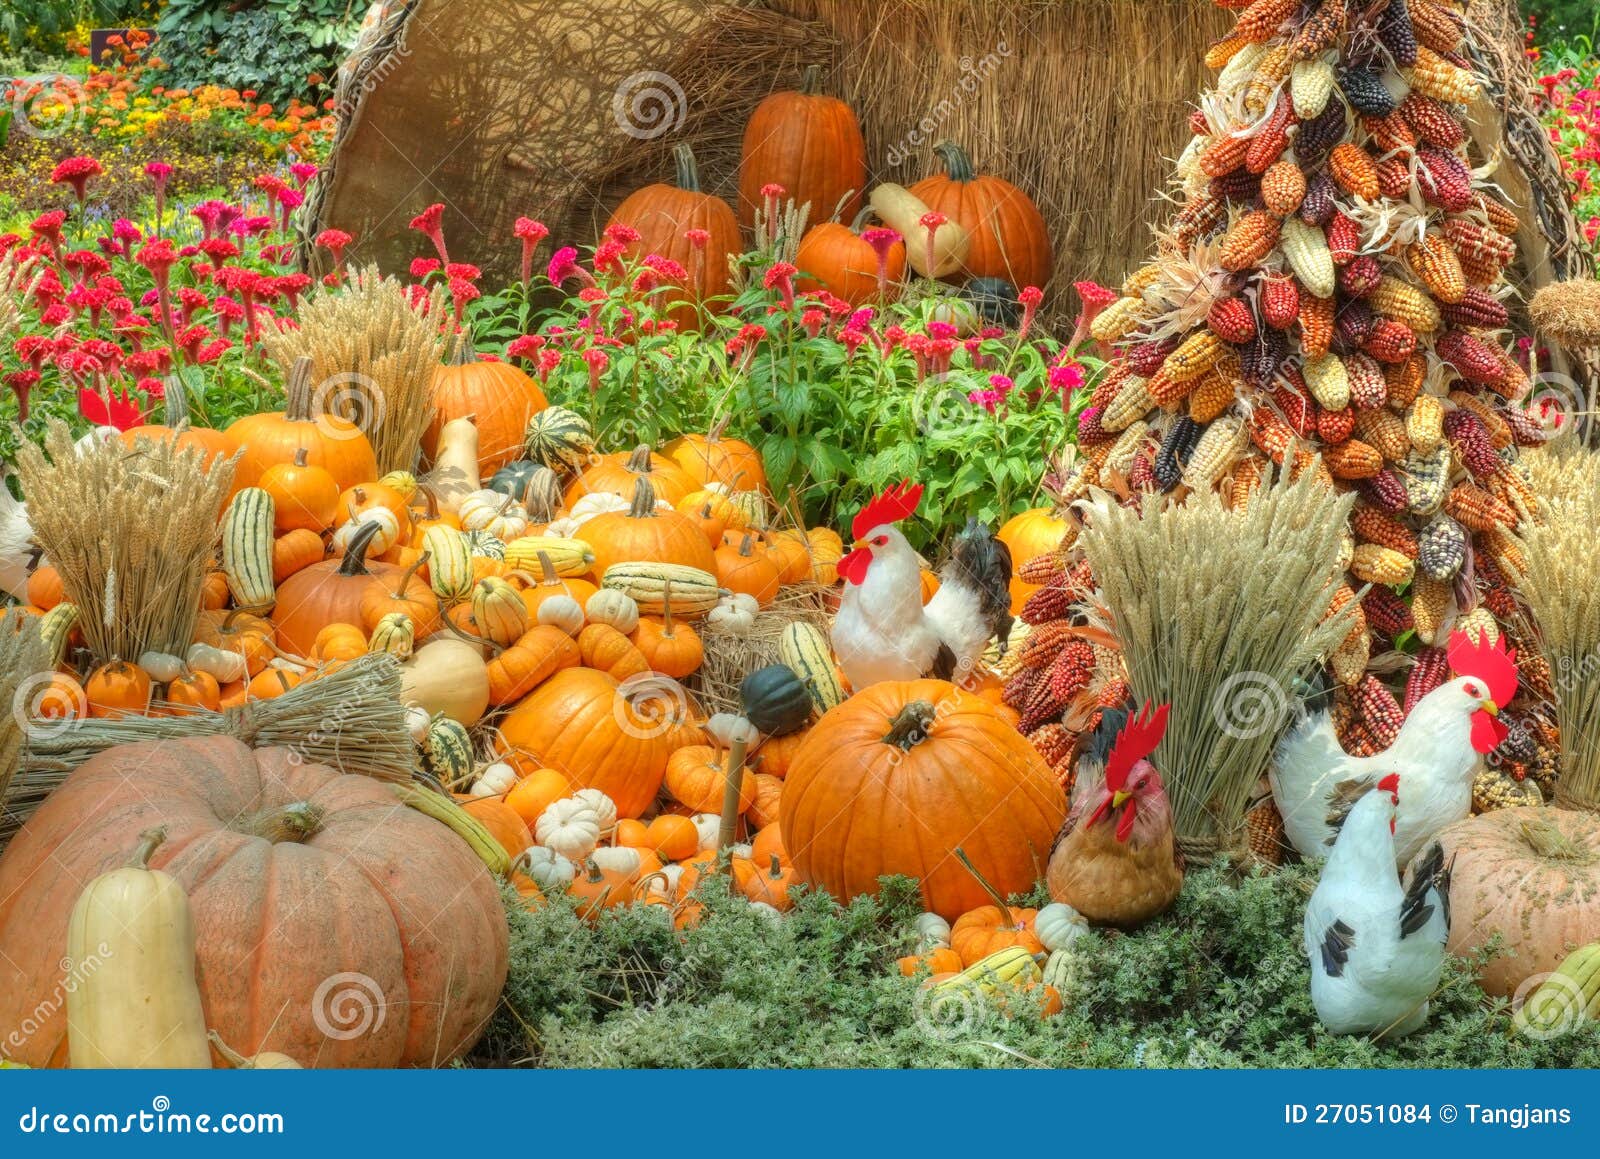 1 716 Bountiful Harvest Photos Free Royalty Free Stock Photos From Dreamstime